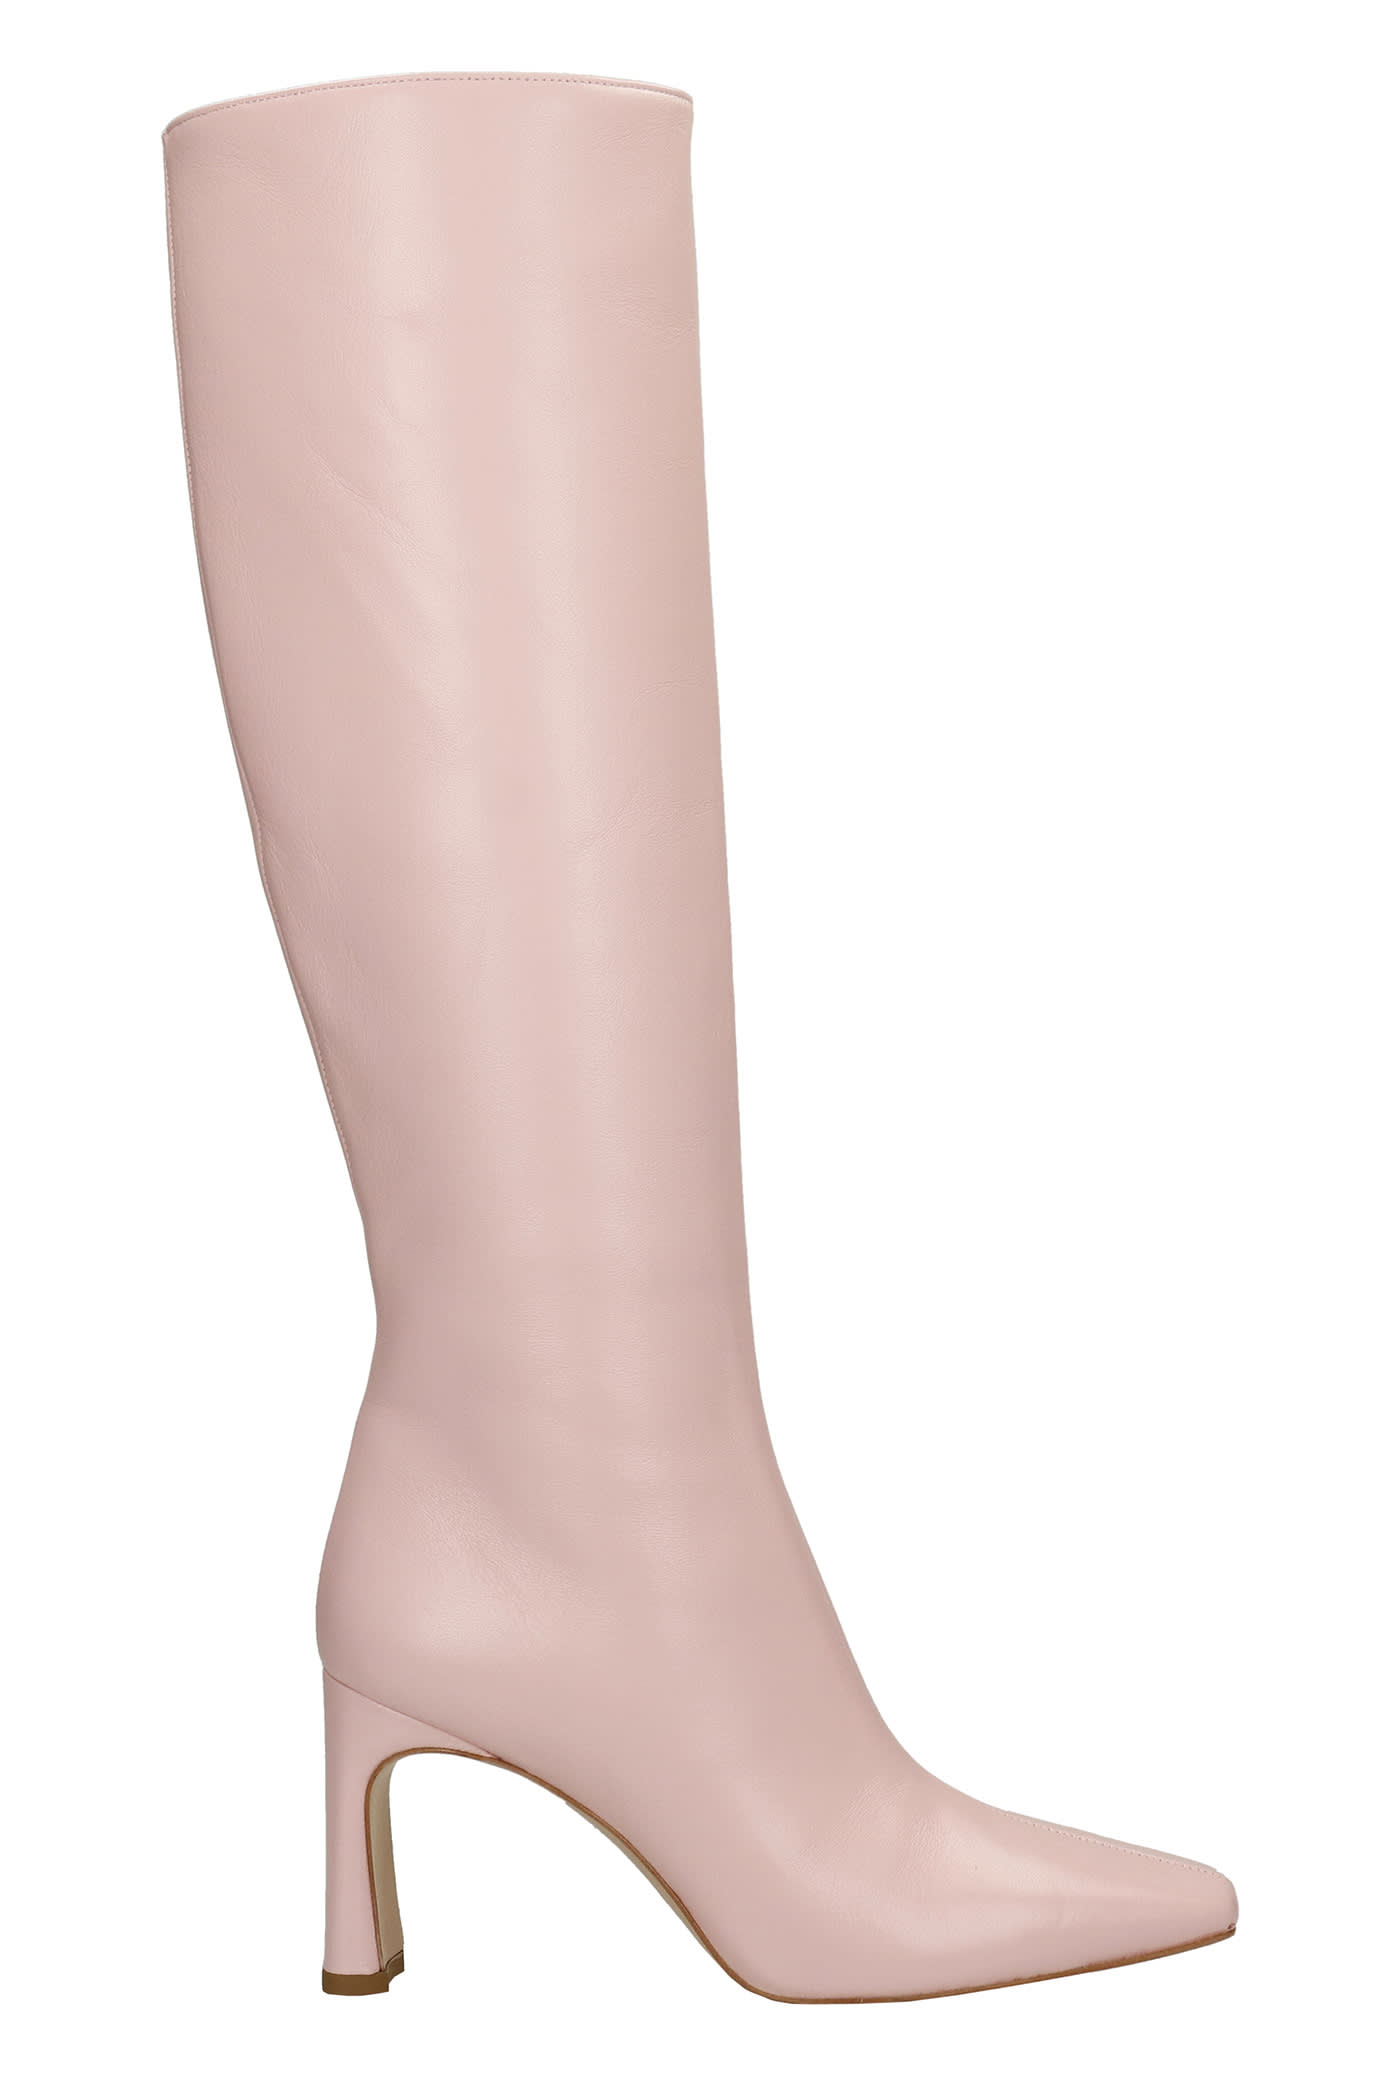 Liu-Jo Squared Lh01 High Heels Boots In Rose-pink Leather